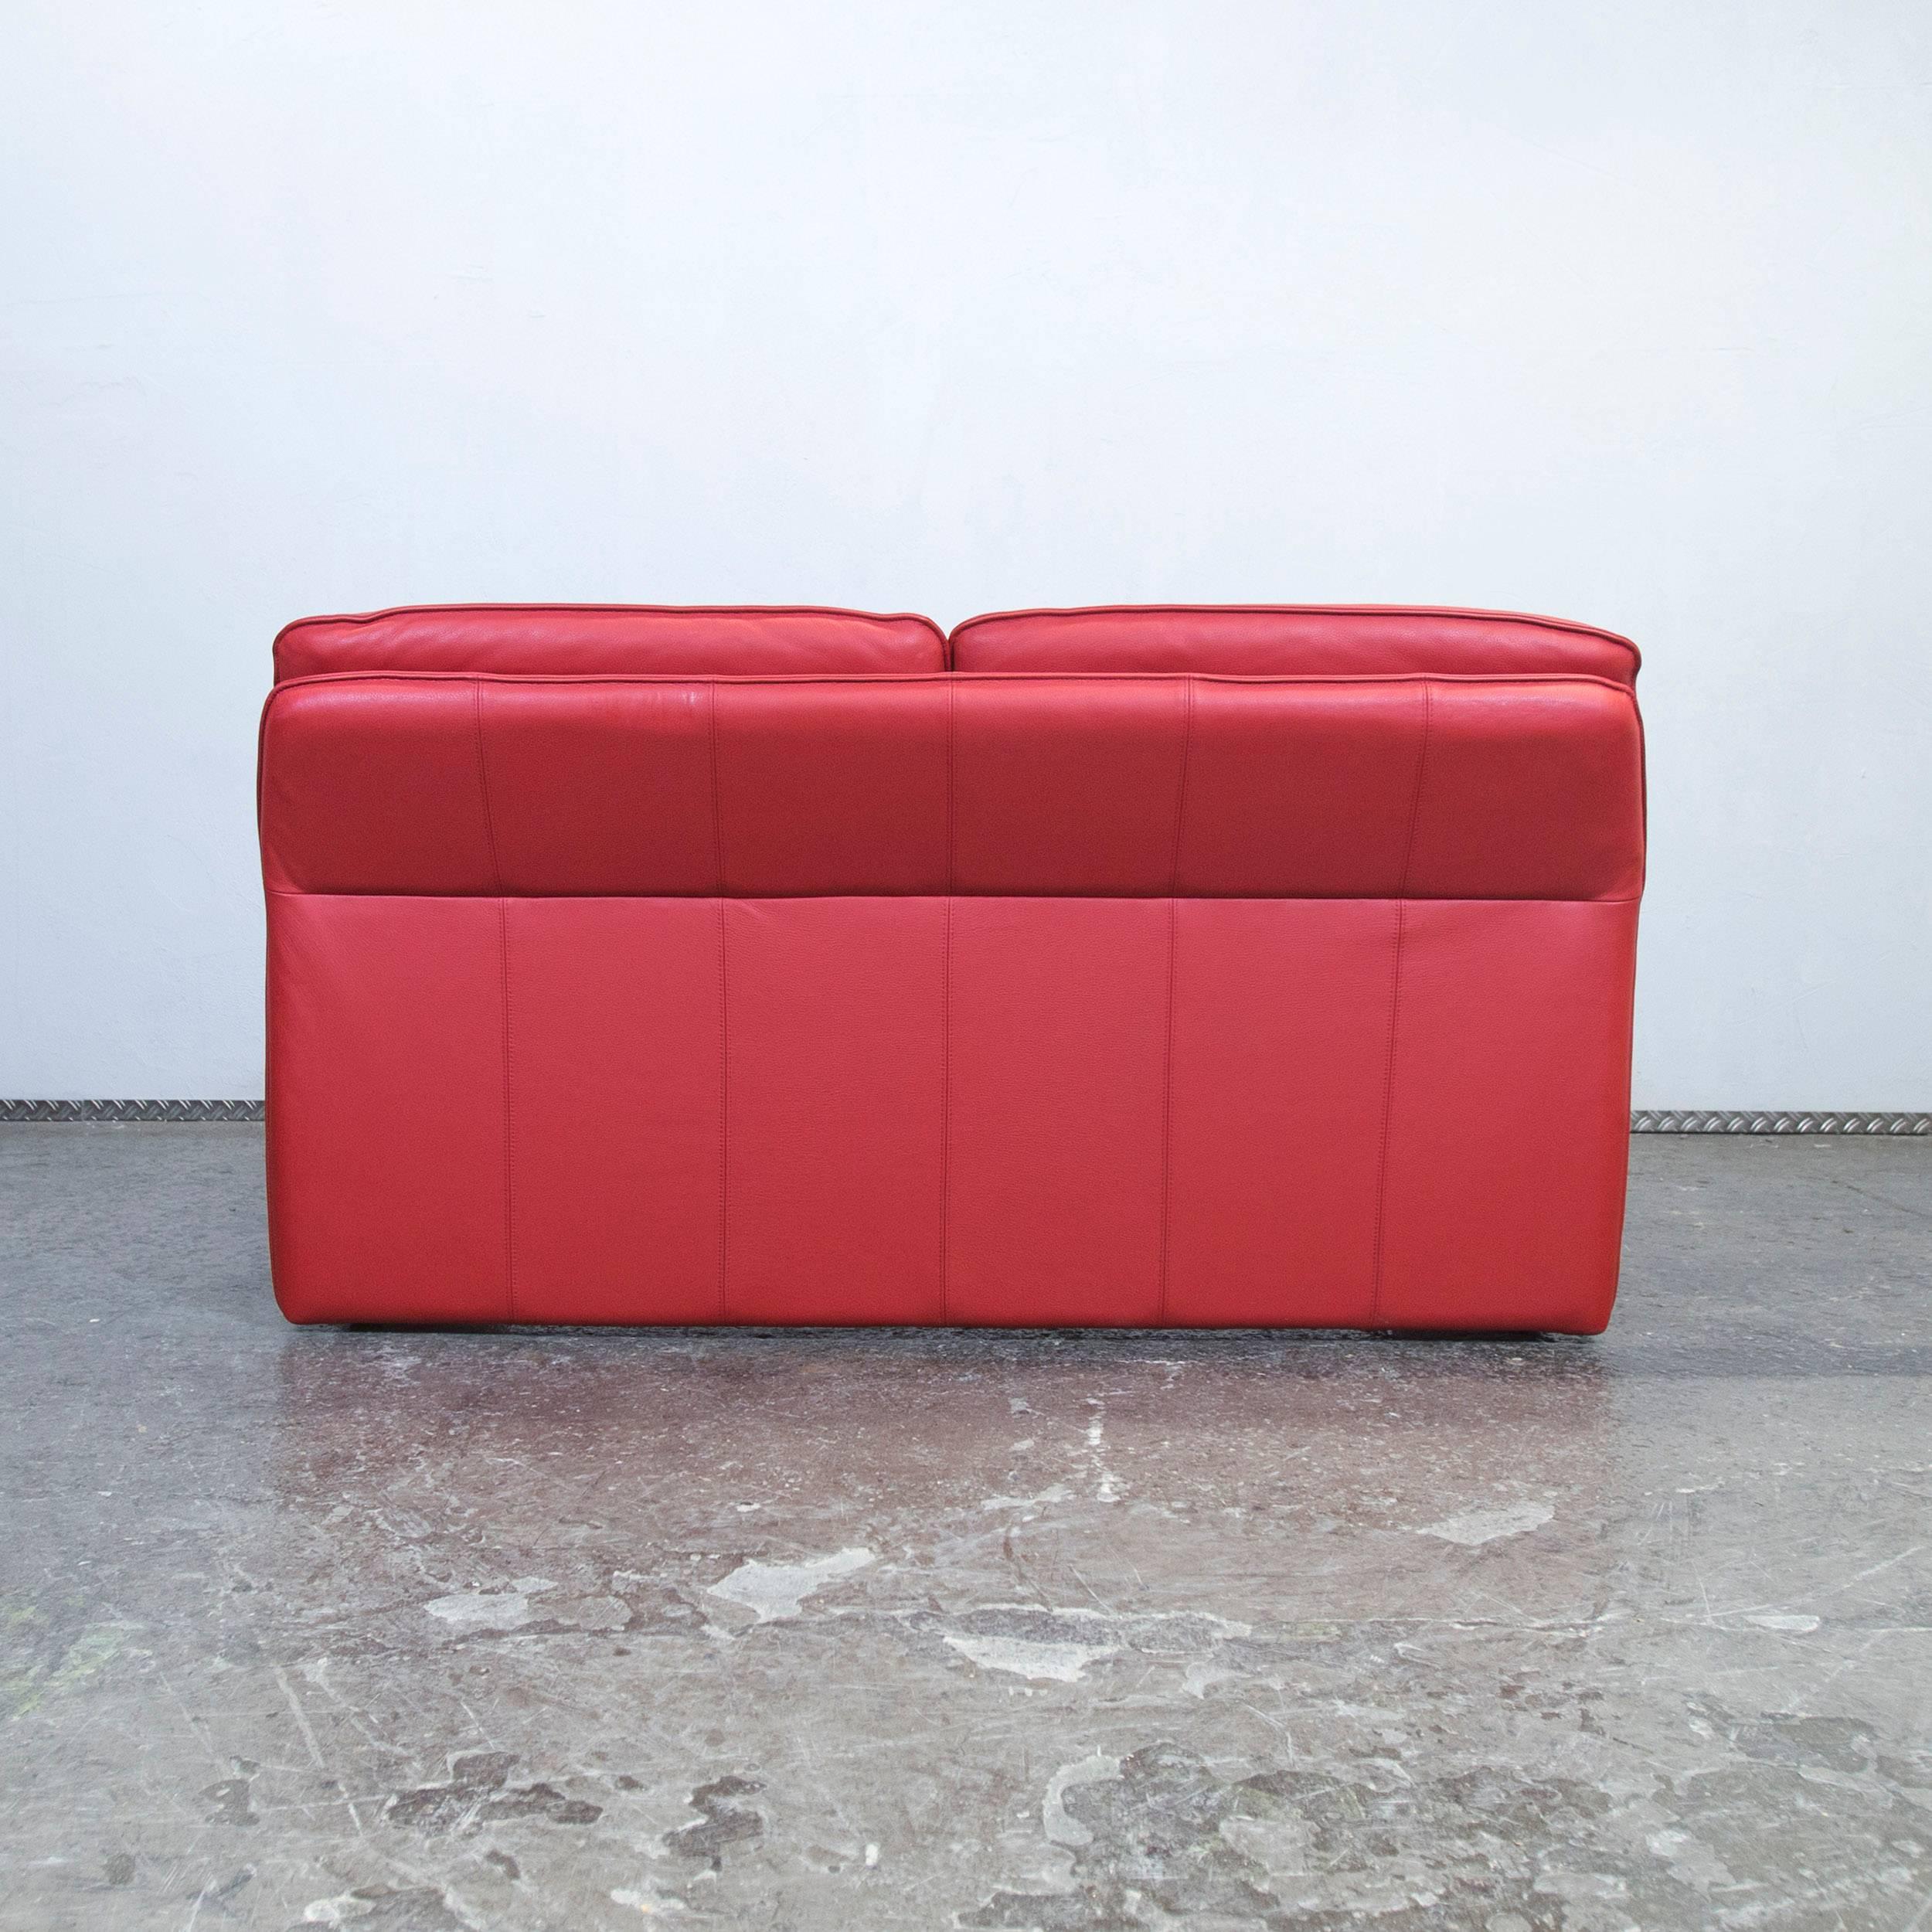 Laauser Designer Sofa Red Leather Two-Seat Couch Modern 2